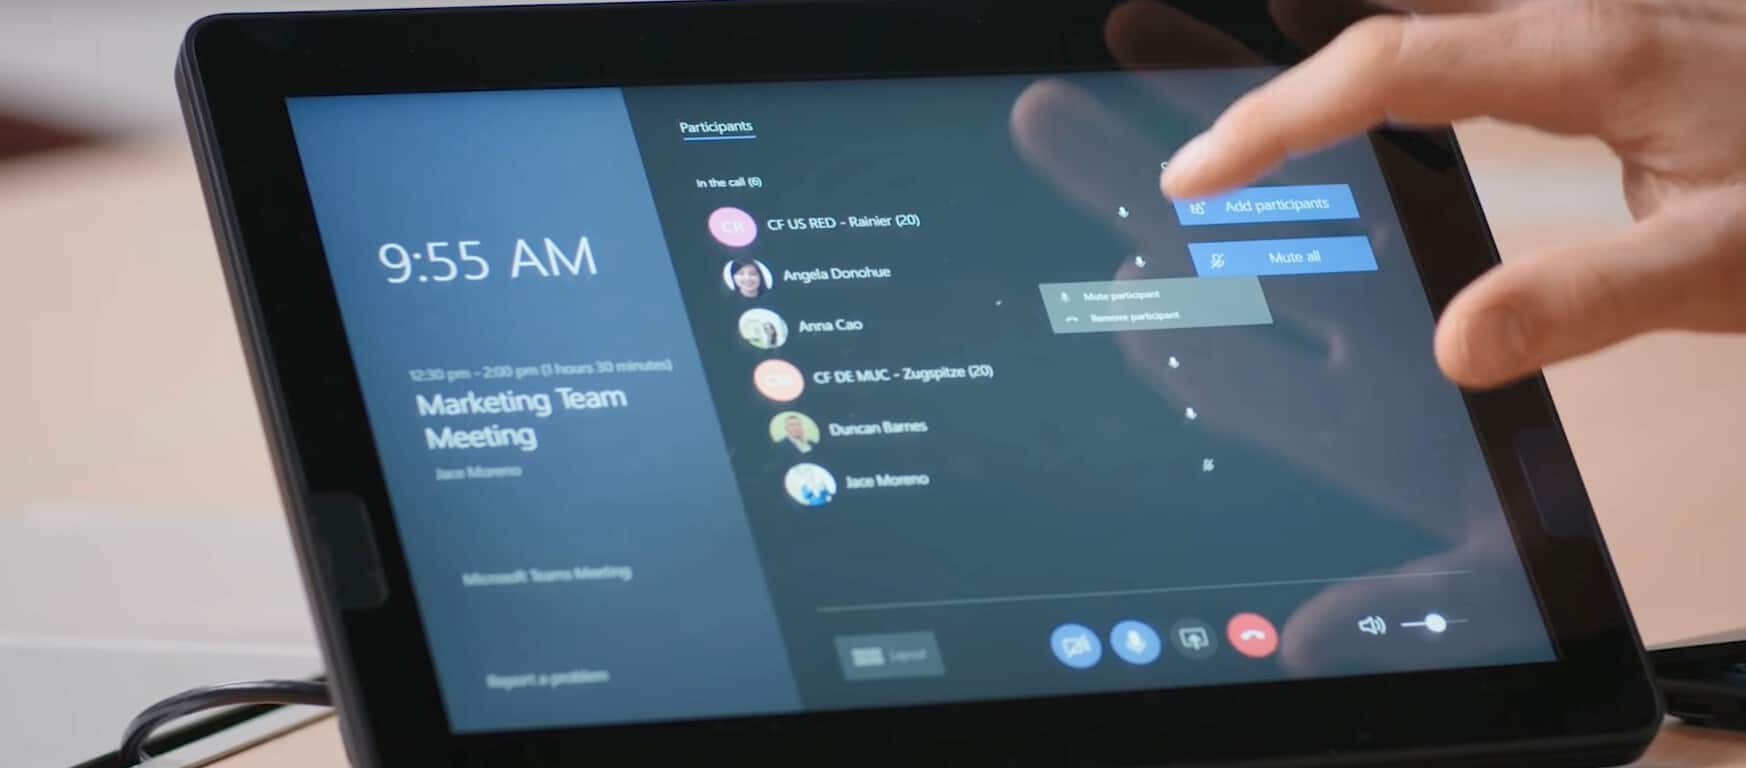 Here's what's new this month in Microsoft Teams - OnMSFT.com - February 6, 2019